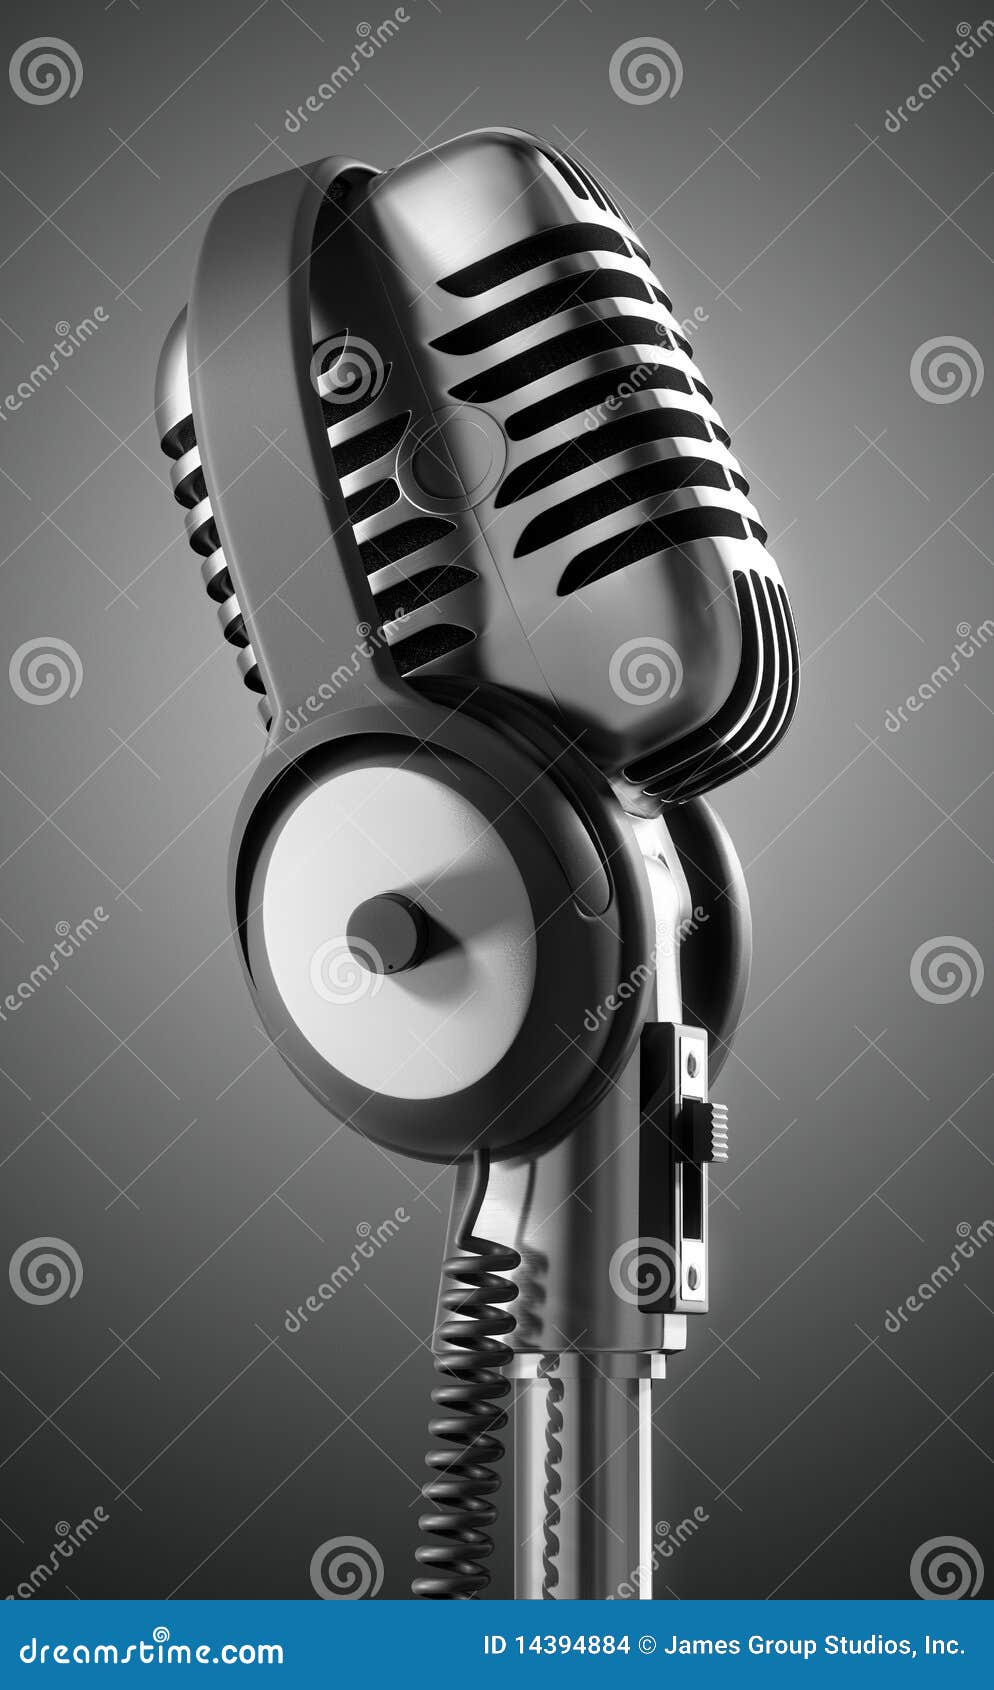 Flaming Hot Event. Black &amp; White 50 s microphone with headphones &amp; clipping path included for those who need a different background.